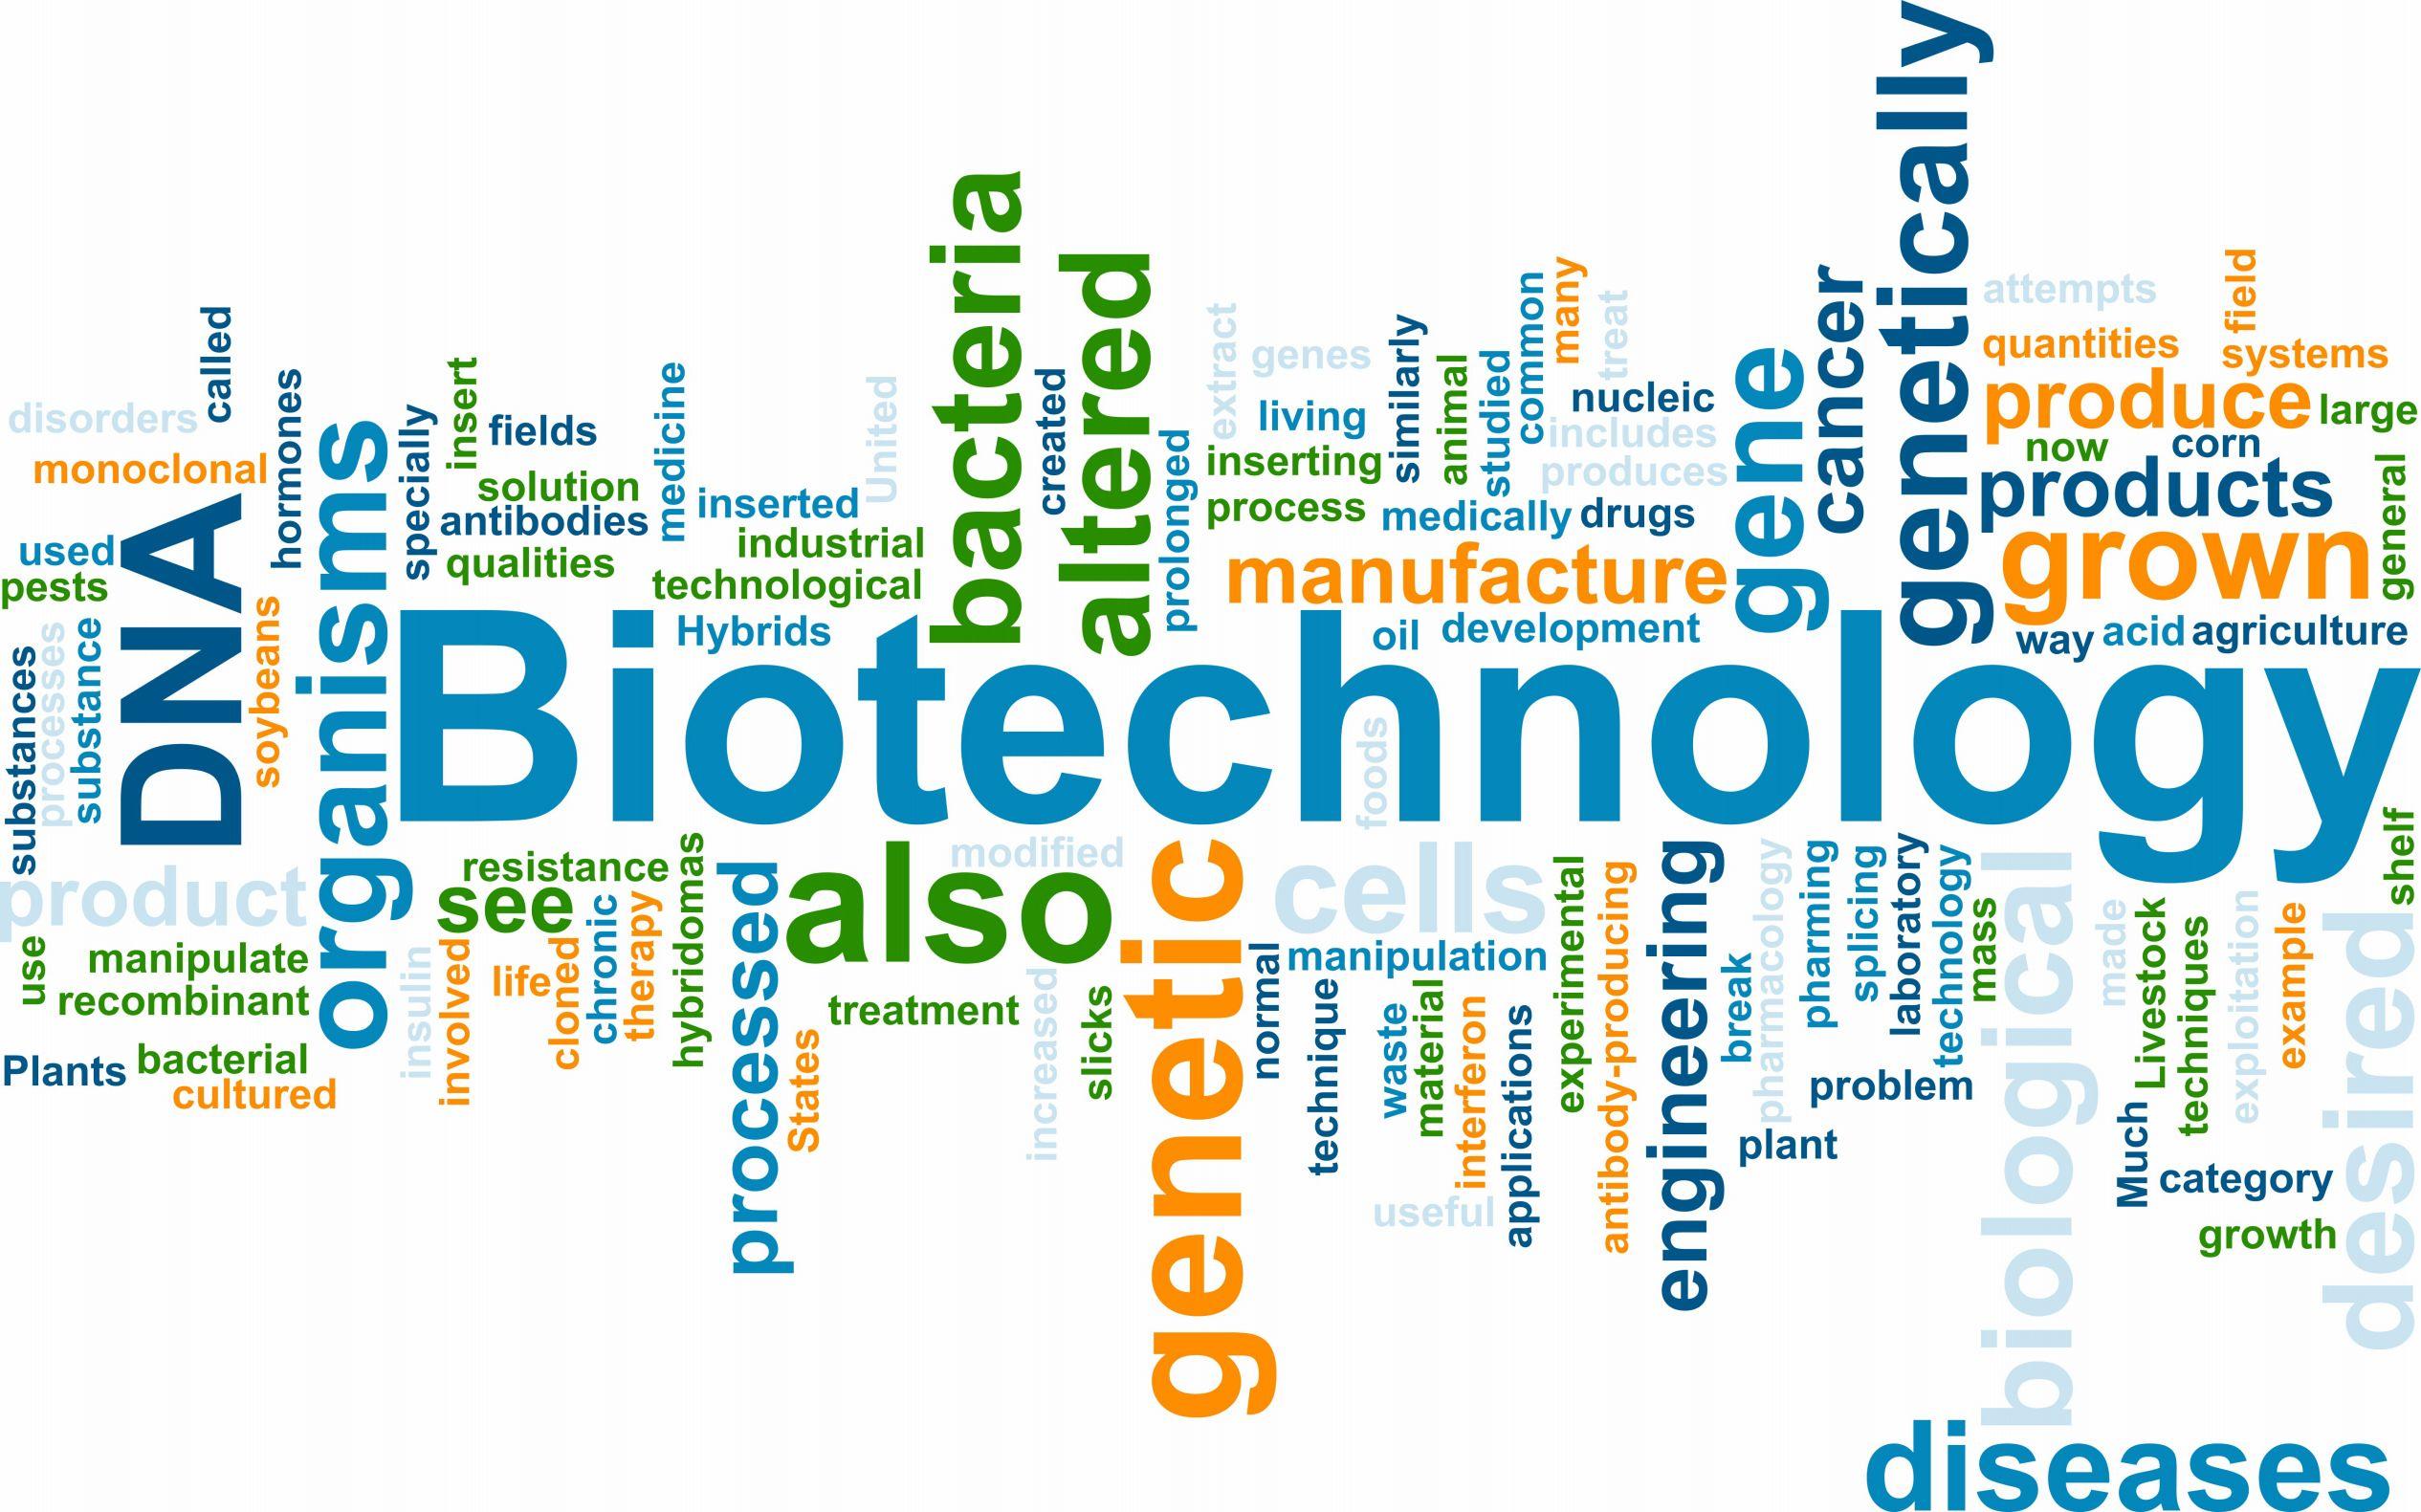 Famous quotes about 'Biotech'